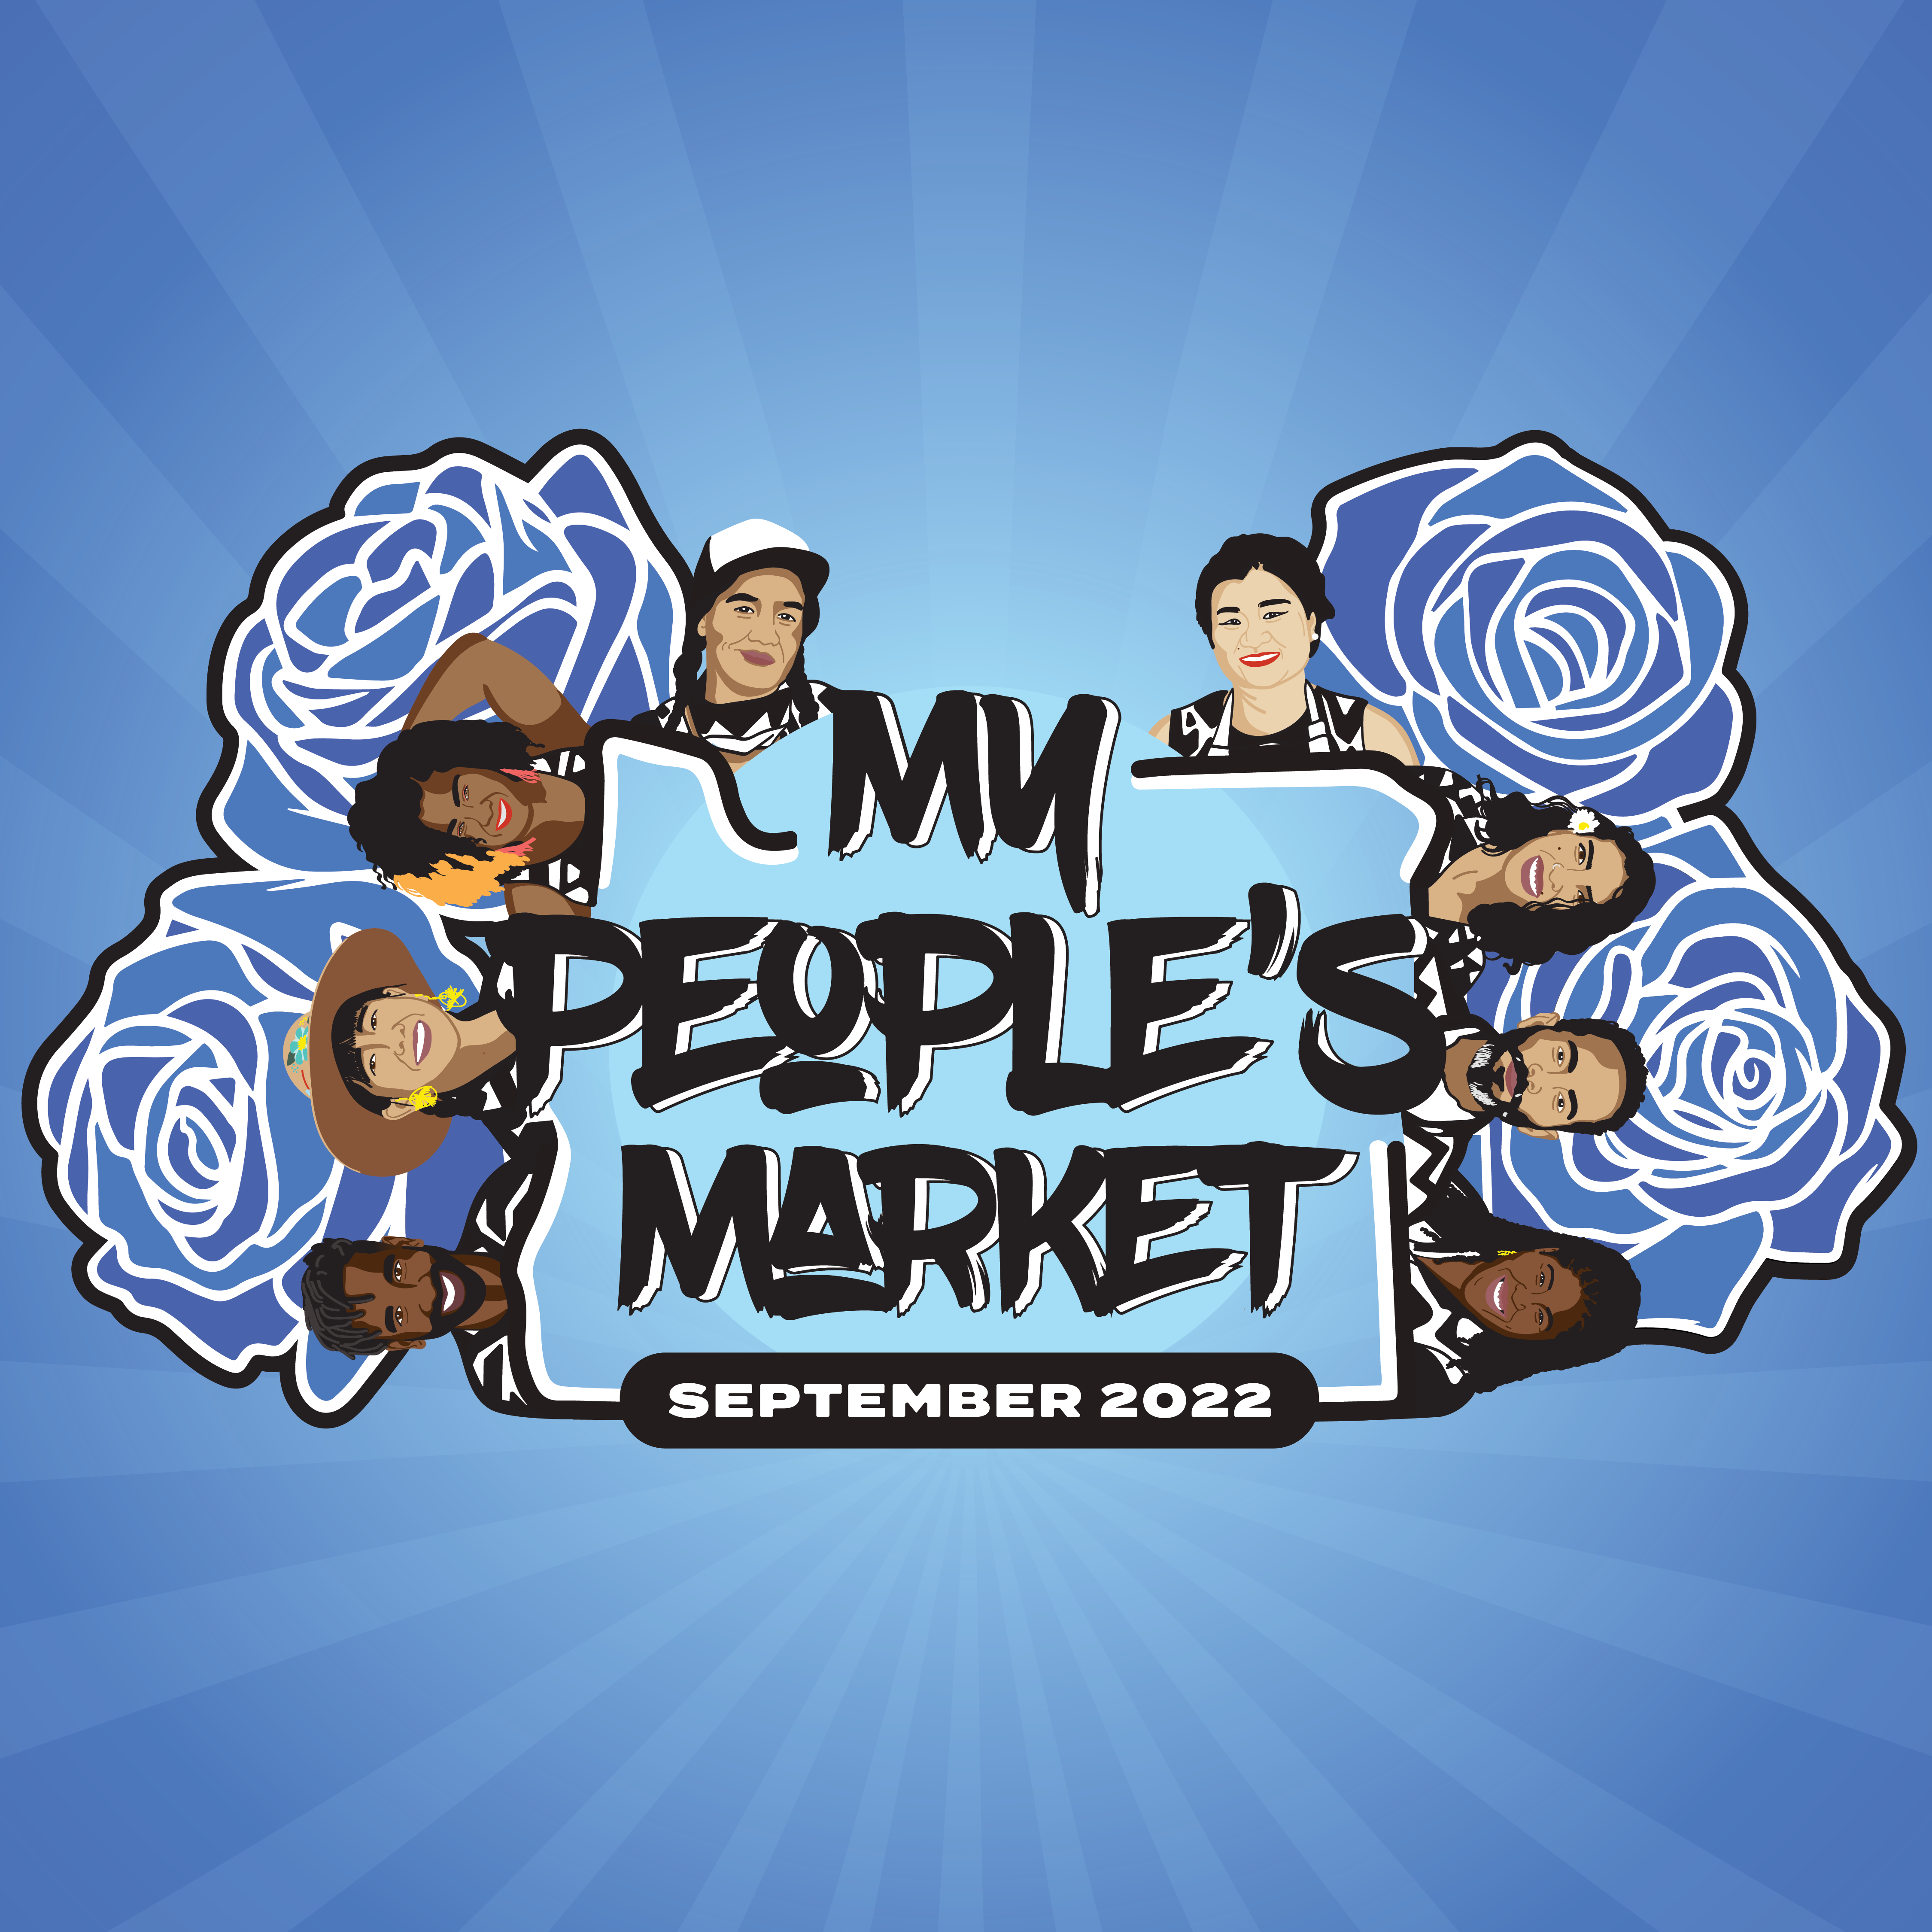 My People’s Market is back in September as a reimagined market centering BIPOC businesses and makers